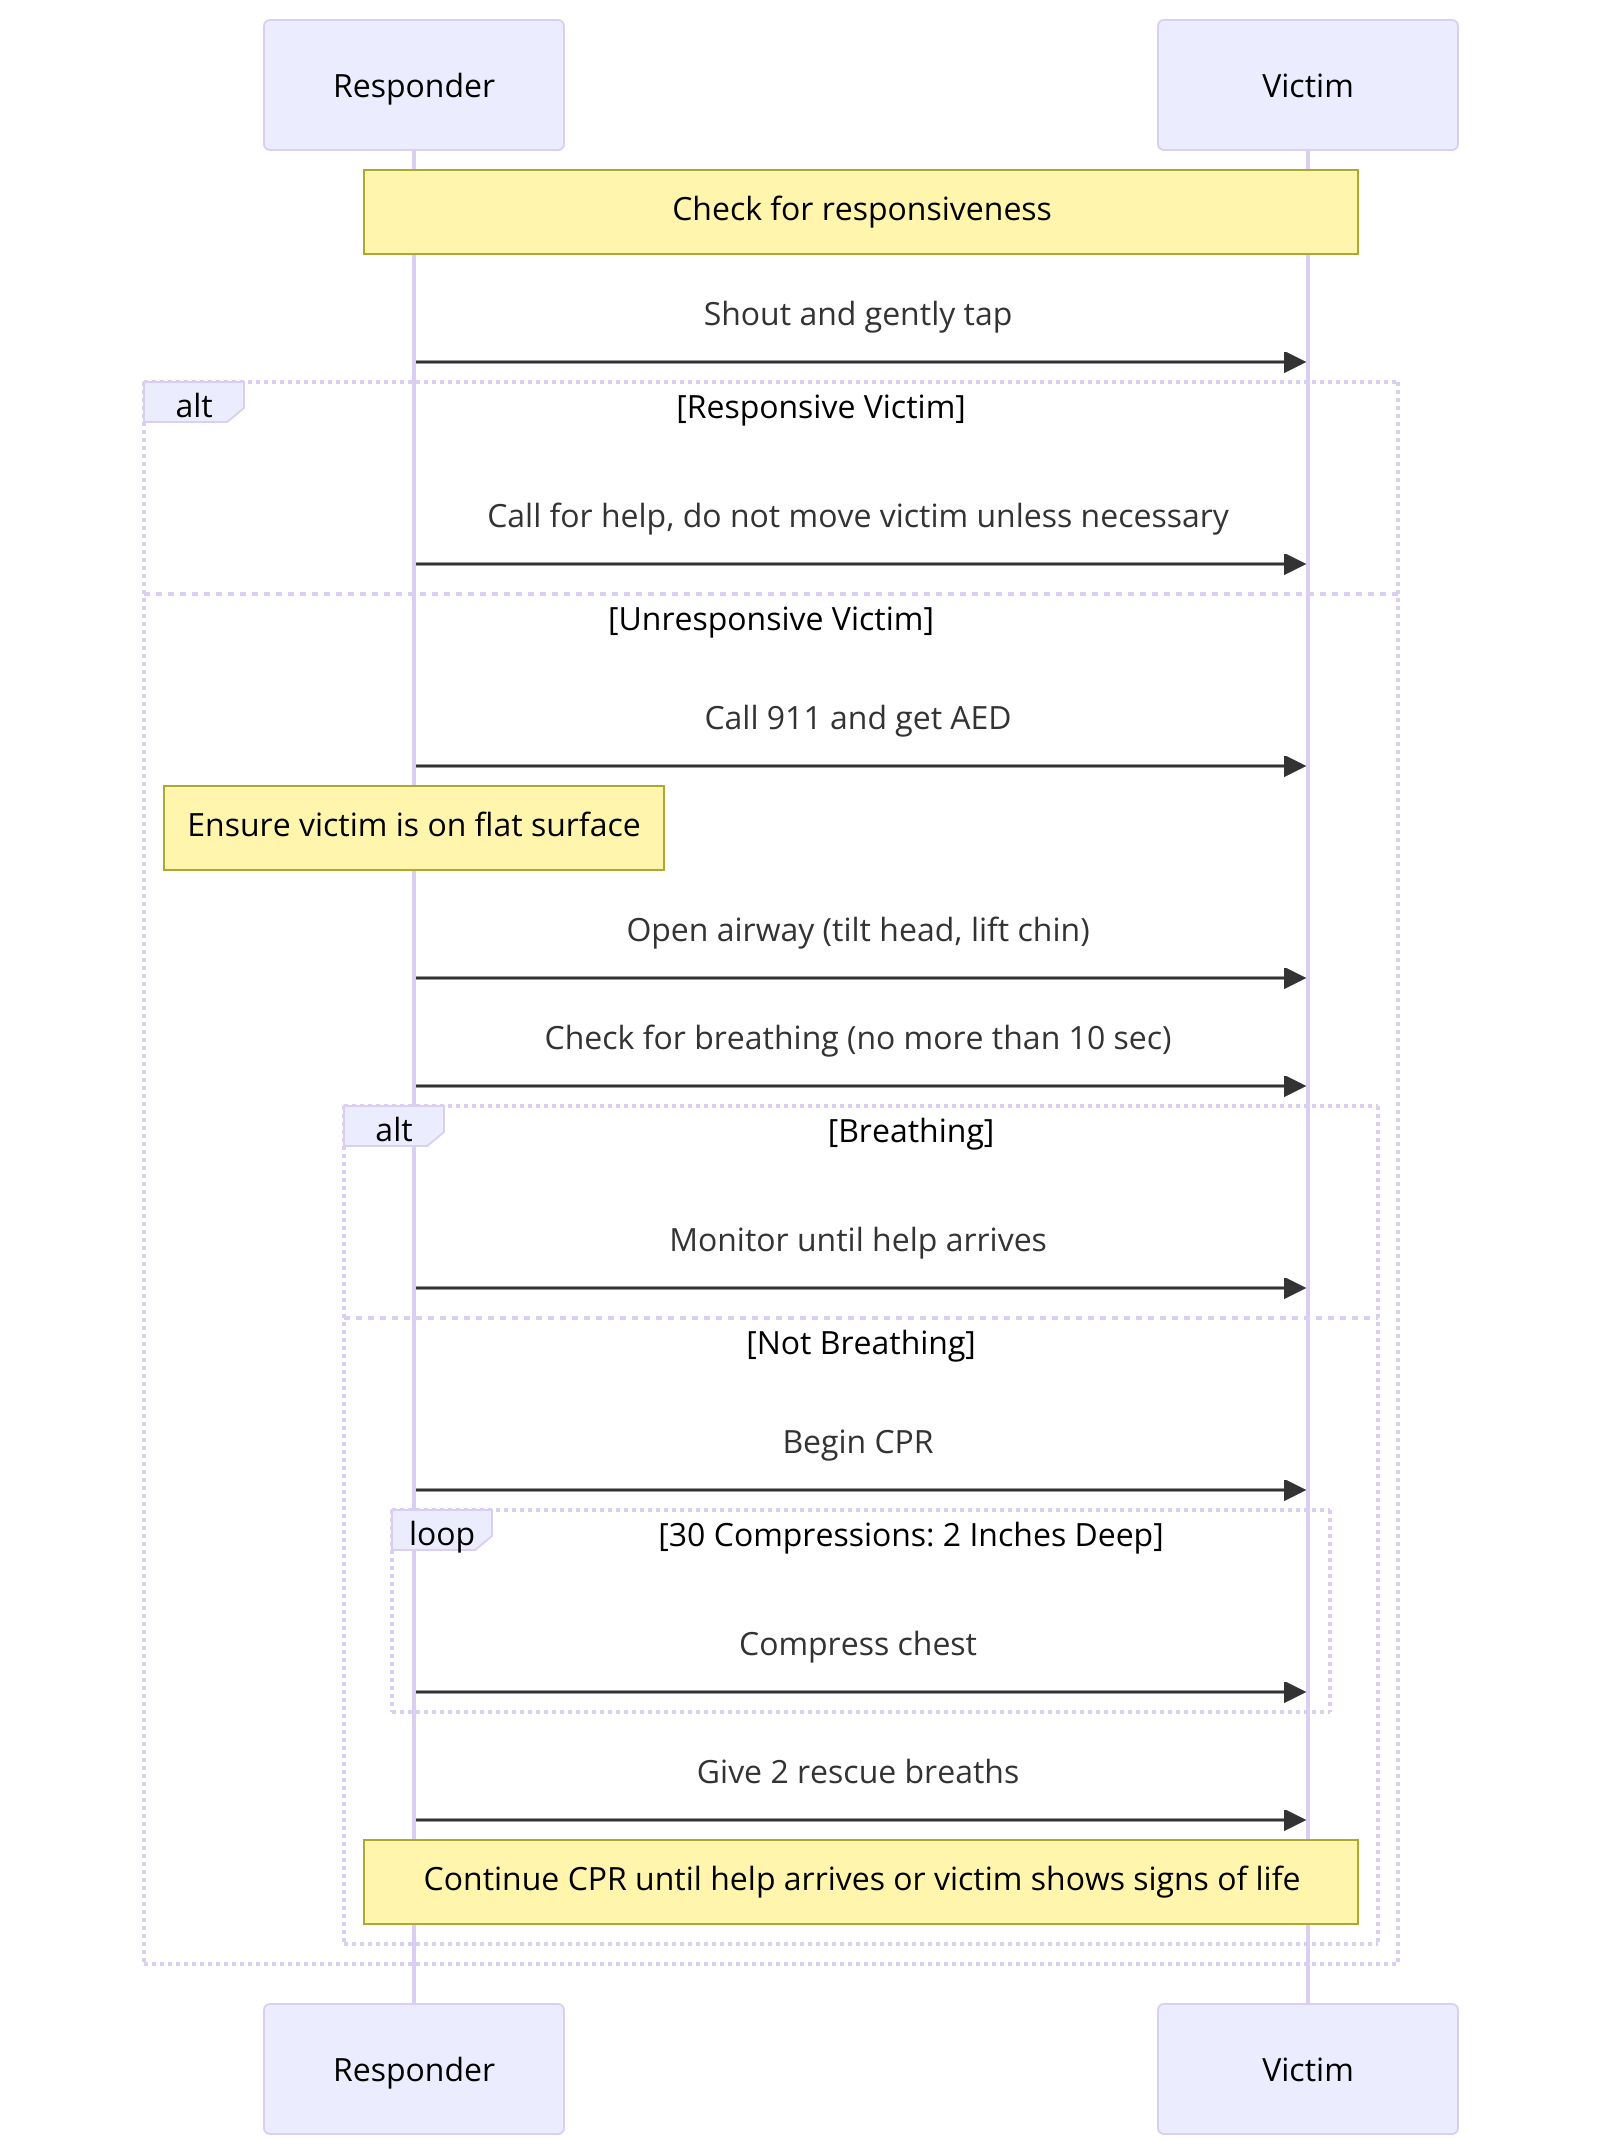 sequence diagram illustrating the key steps in performing CPR